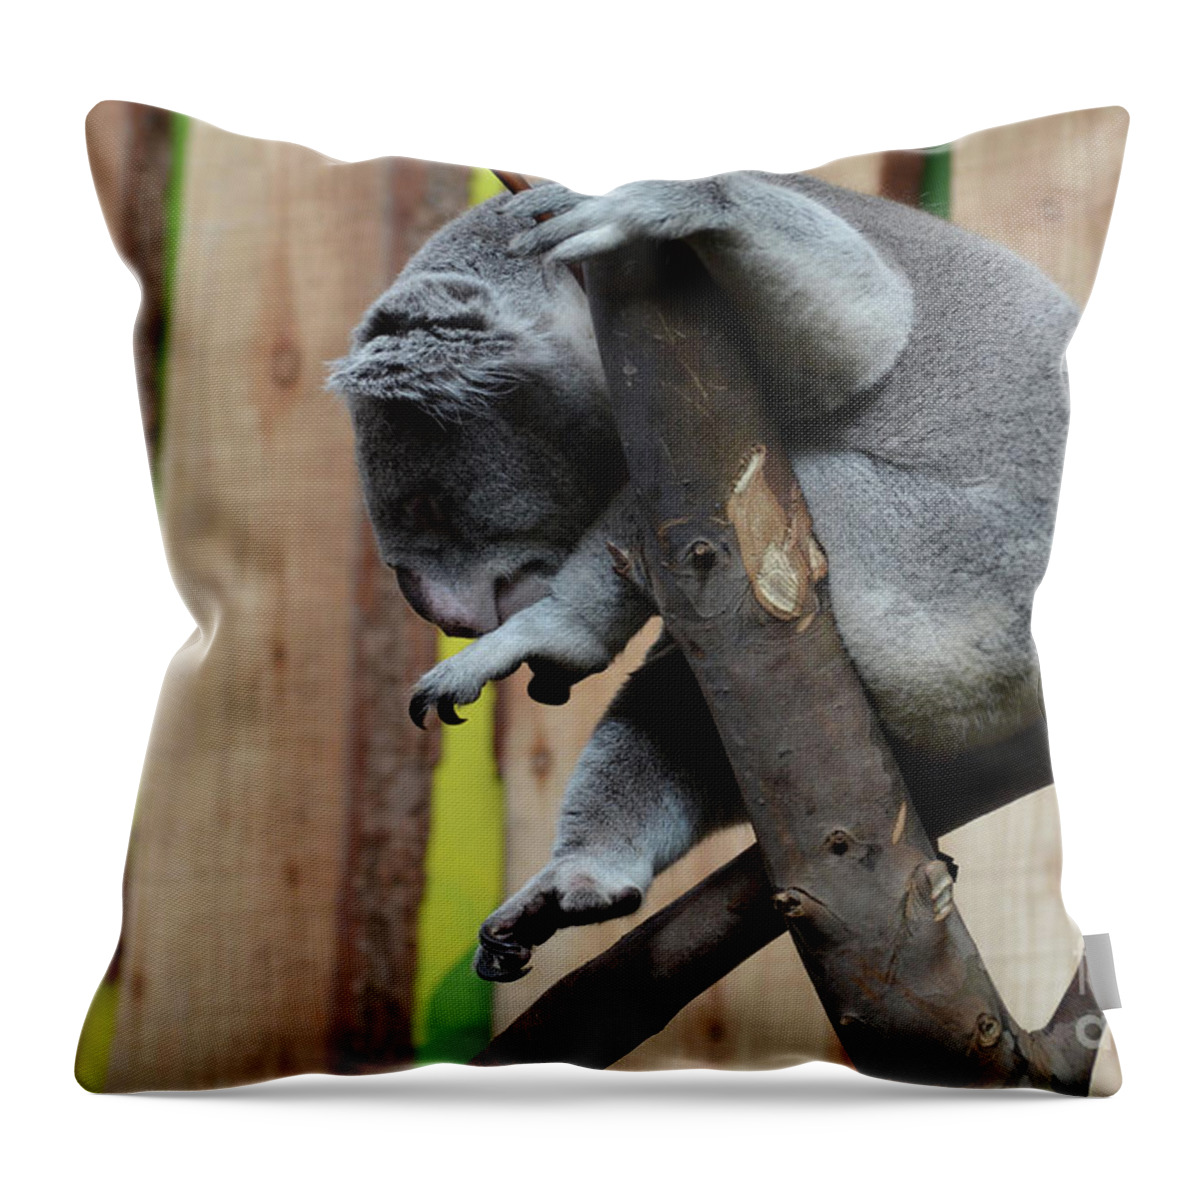 Koala Throw Pillow featuring the photograph Koala Bear with His Toes Curled Sitting in a Tree by DejaVu Designs